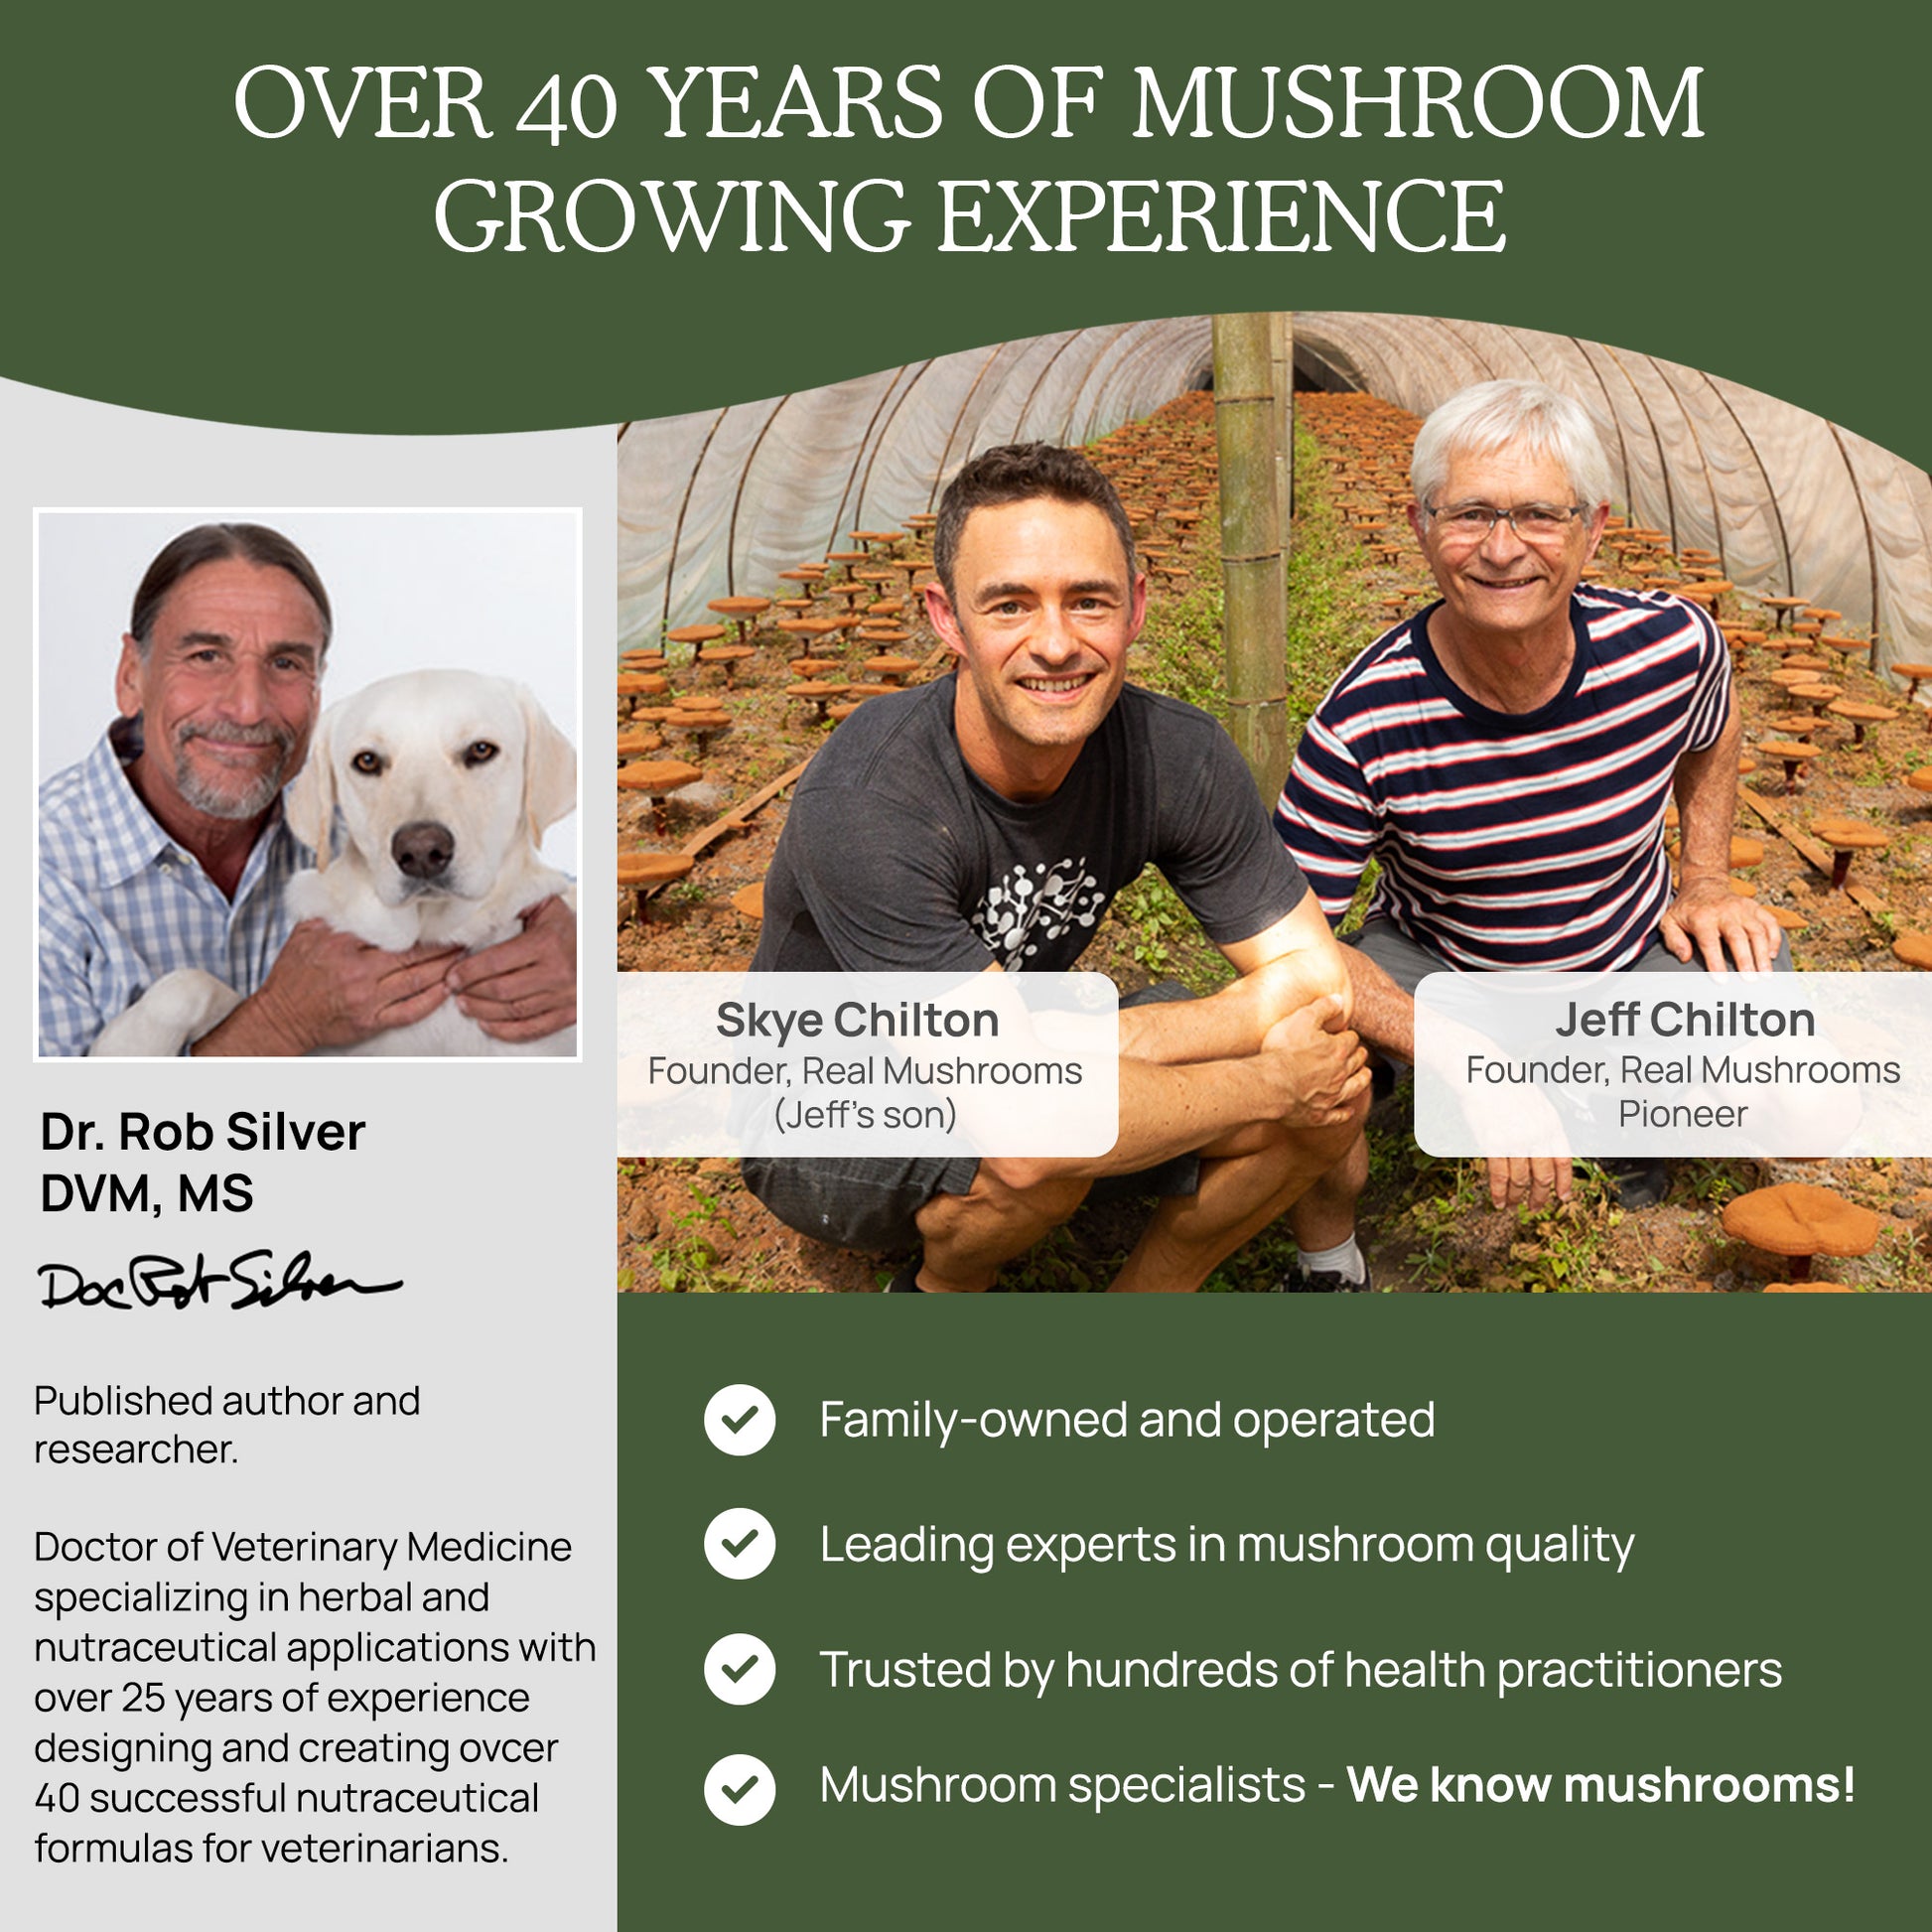 The image is a promotional graphic highlighting the expertise and experience behind Real Mushrooms, a company specializing in Turkey Tail Mushroom Extract Powder for Pets. It features portraits of three key individuals: Dr. Bob Silver, who is a published veterinarian with over